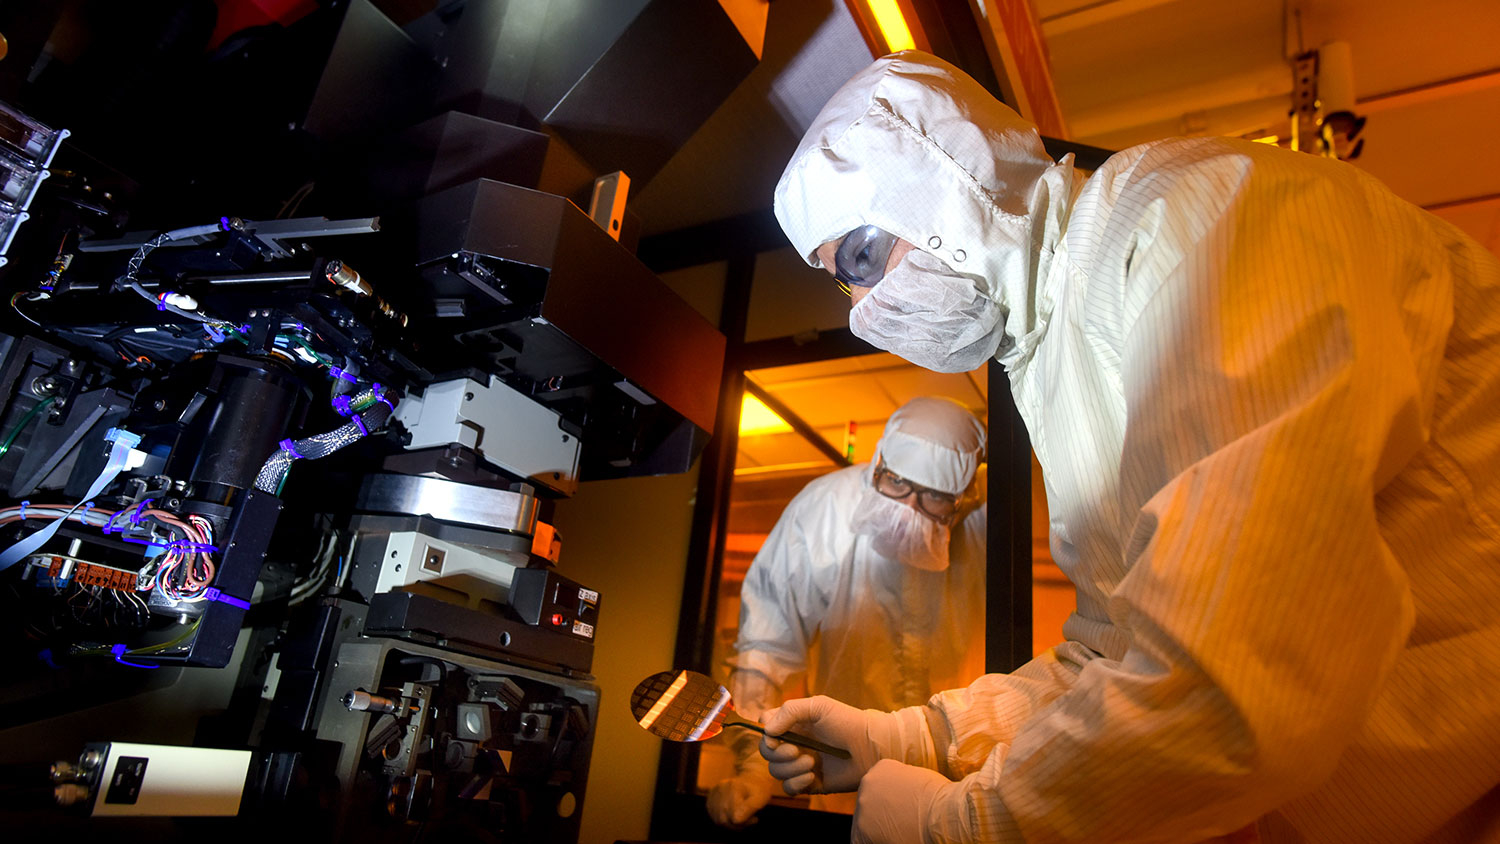 Researchers in full coverage lab gear work on nanofabrication.